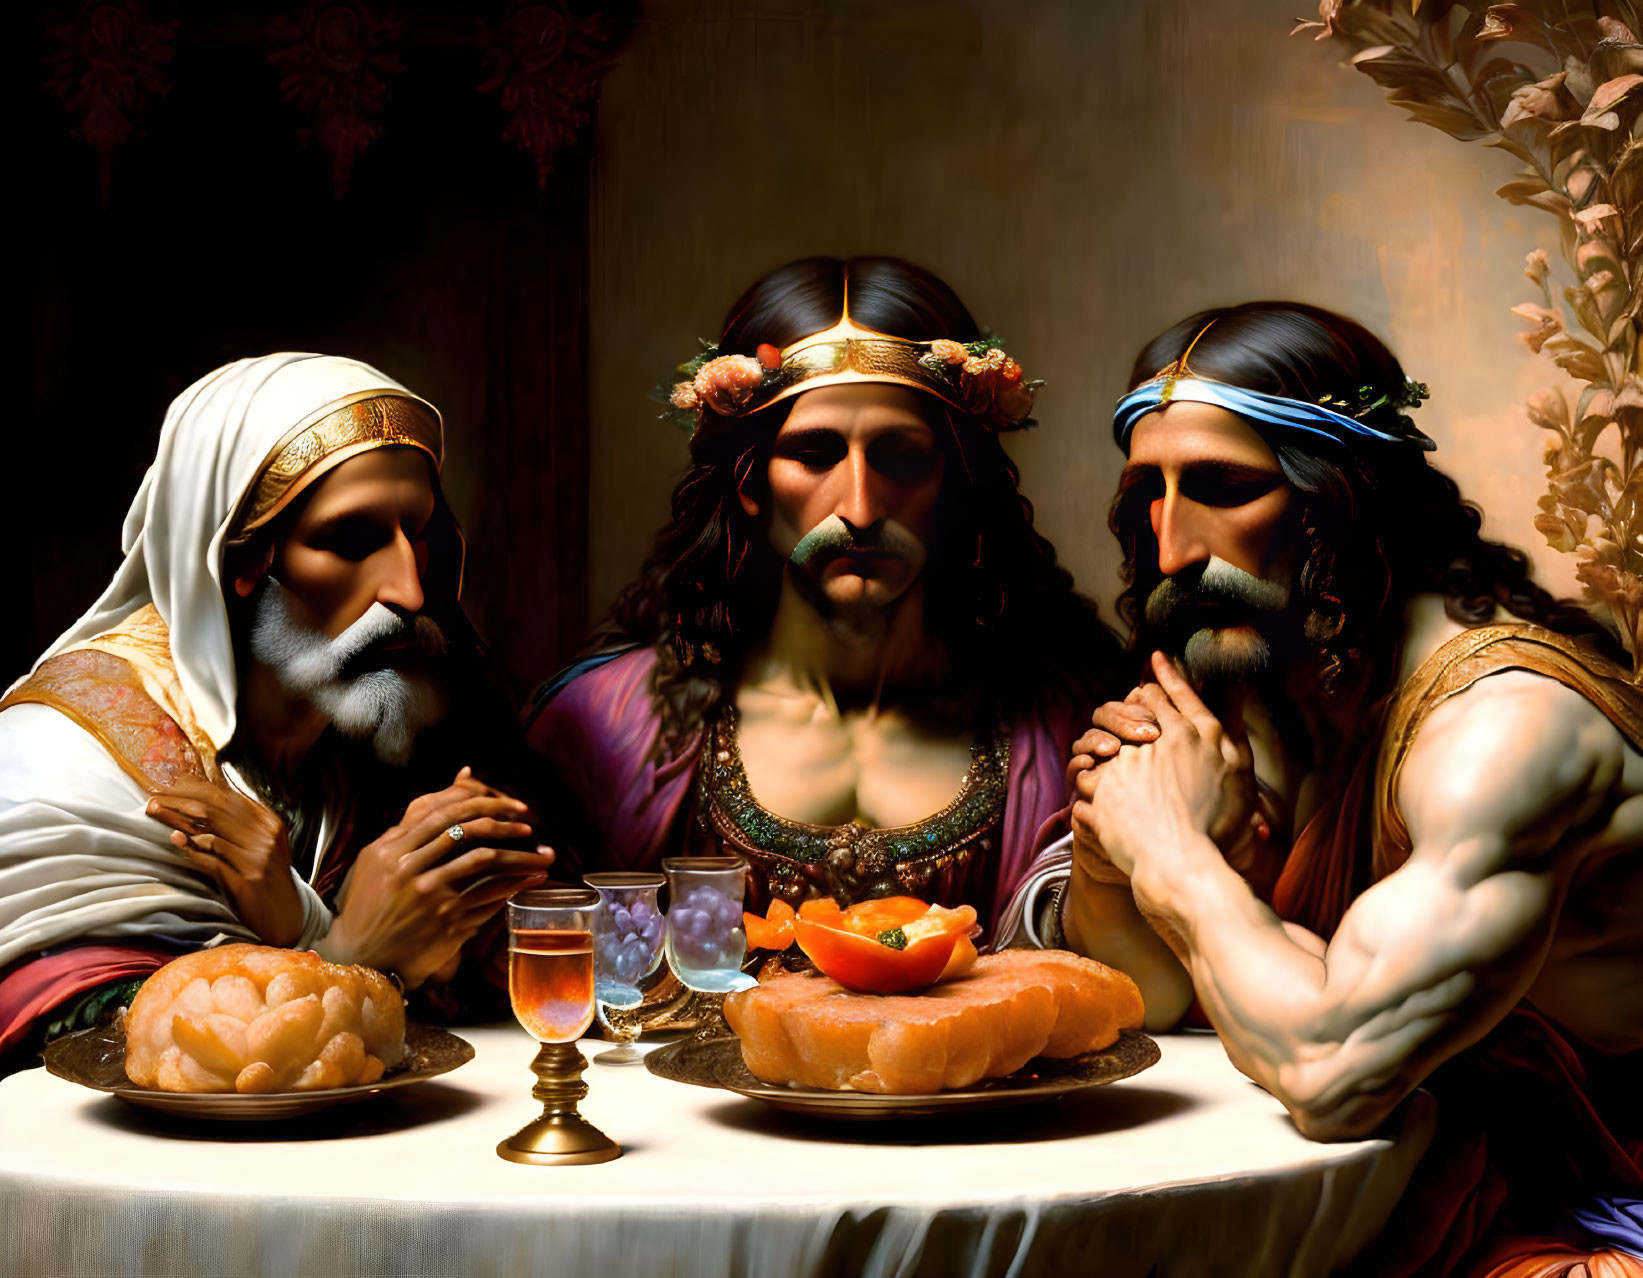 Three bearded men in classical attire seated at a table with bread, fruit, and wine.